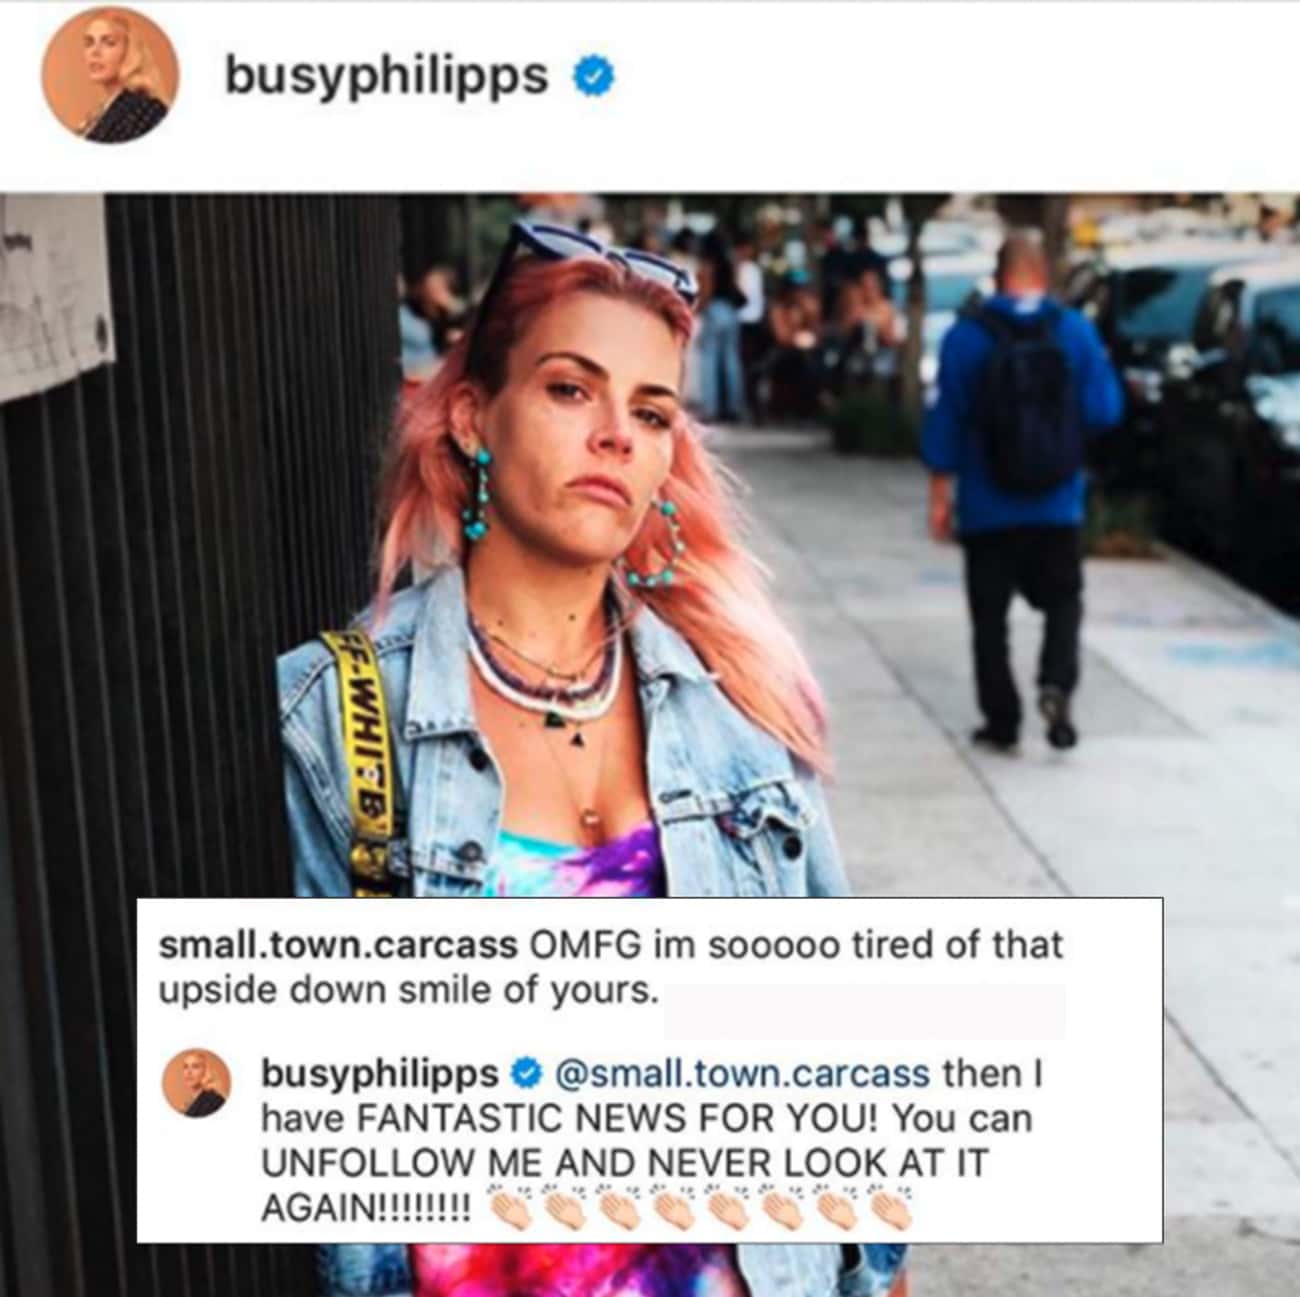 celebs savage replies - cool - busyphilipps FWhite small.town.carcass Omfg im sooooo tired of that upside down smile of yours. busyphilipps .town.carcass then I have Fantastic News For You! You can Un Me And Never Look At It Again!!!!!!!!